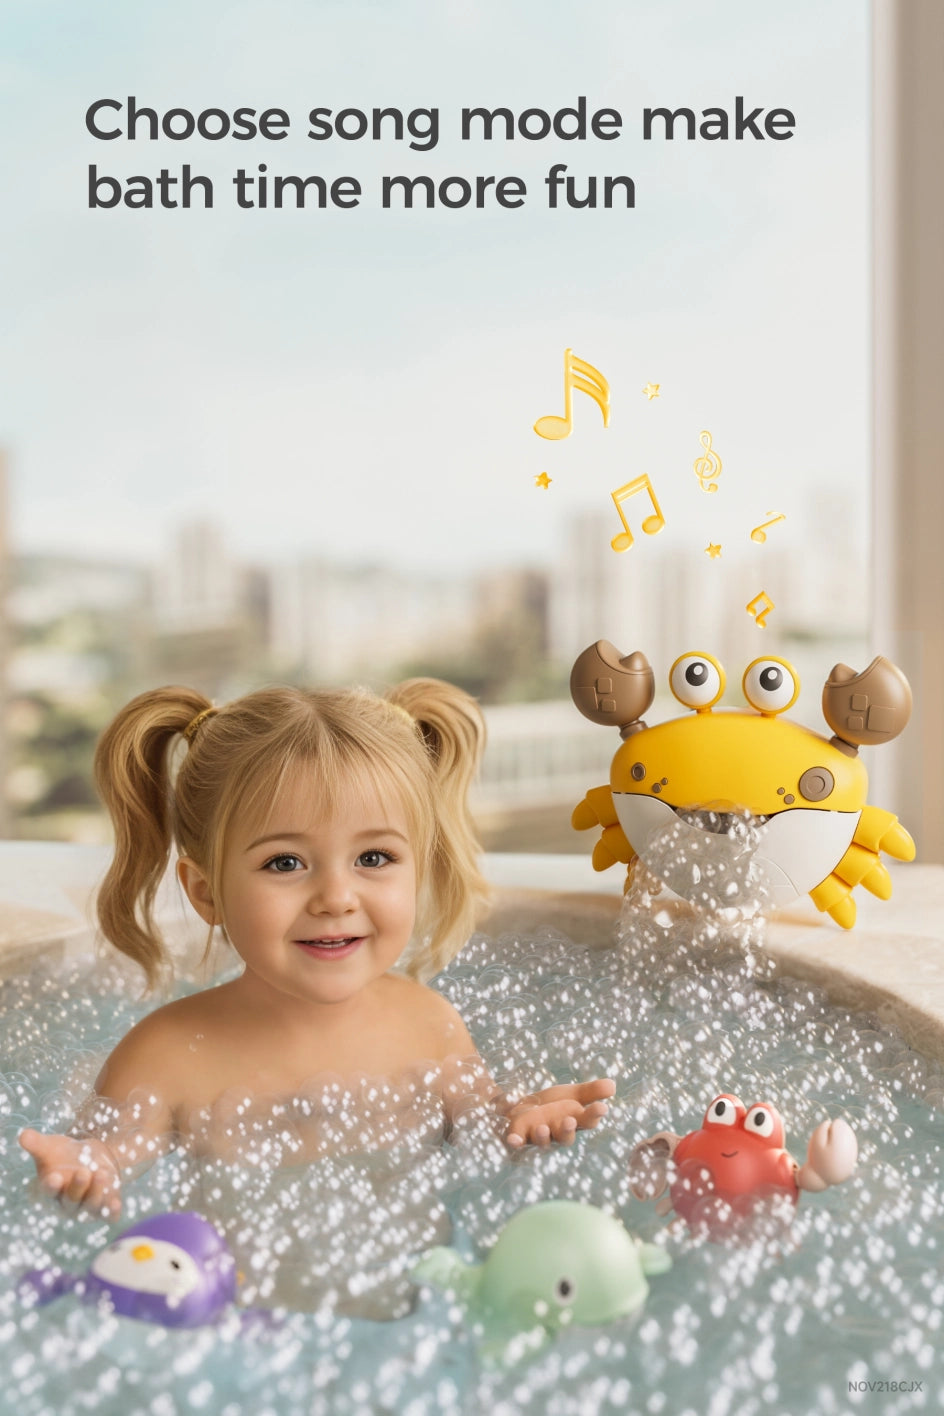 Kids_ bath toy featuring crab bubble maker